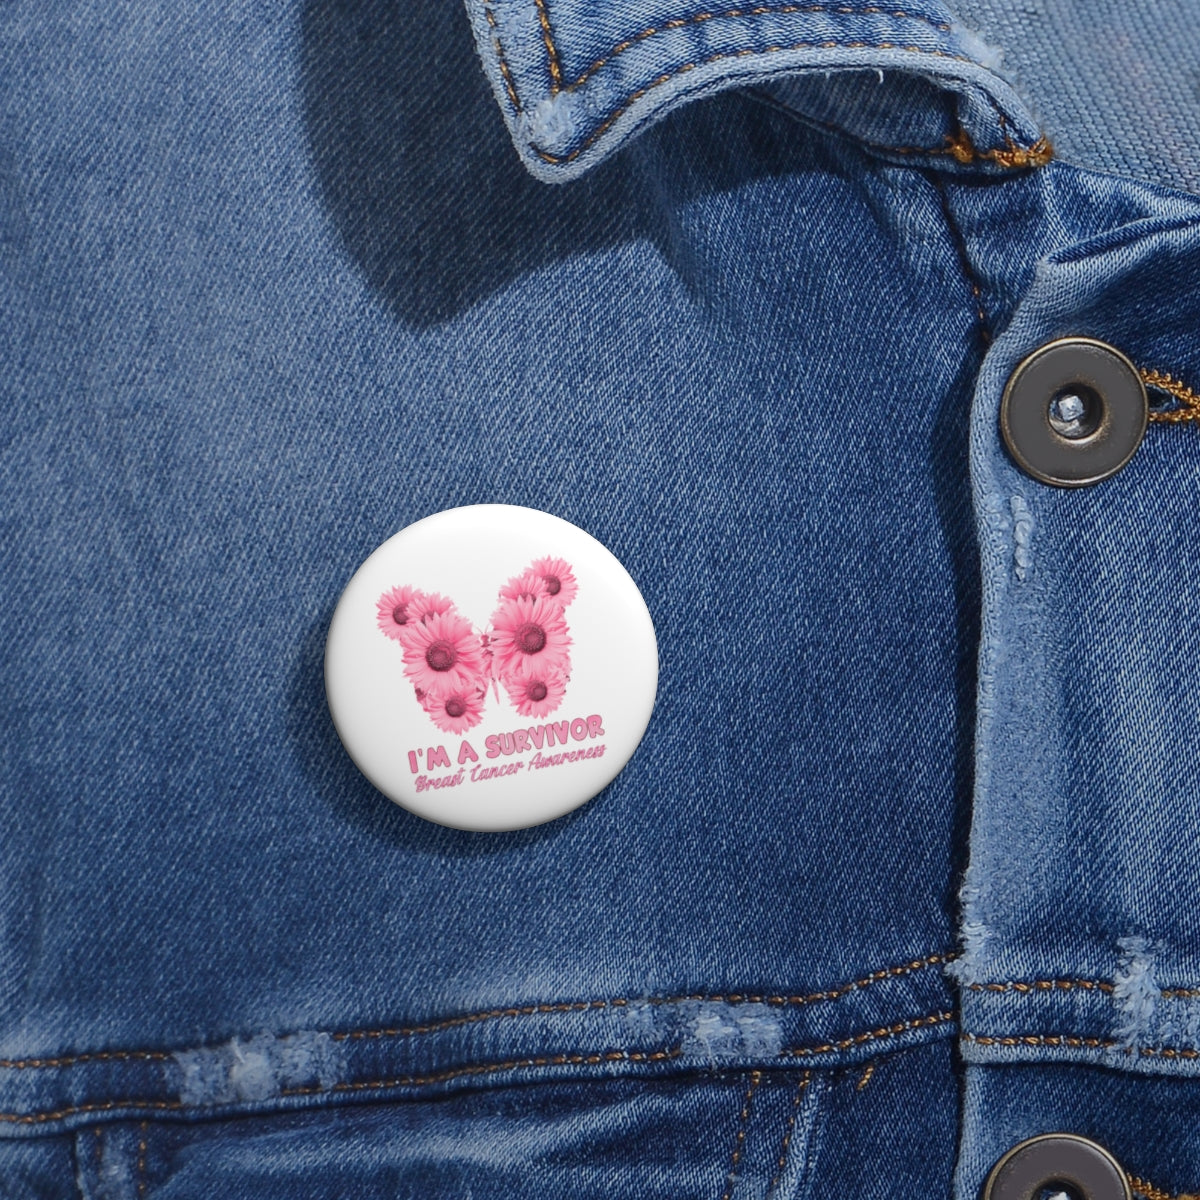 I'm a Survivor Pin Buttons| Breast Cancer Awareness Pin Back Buttons